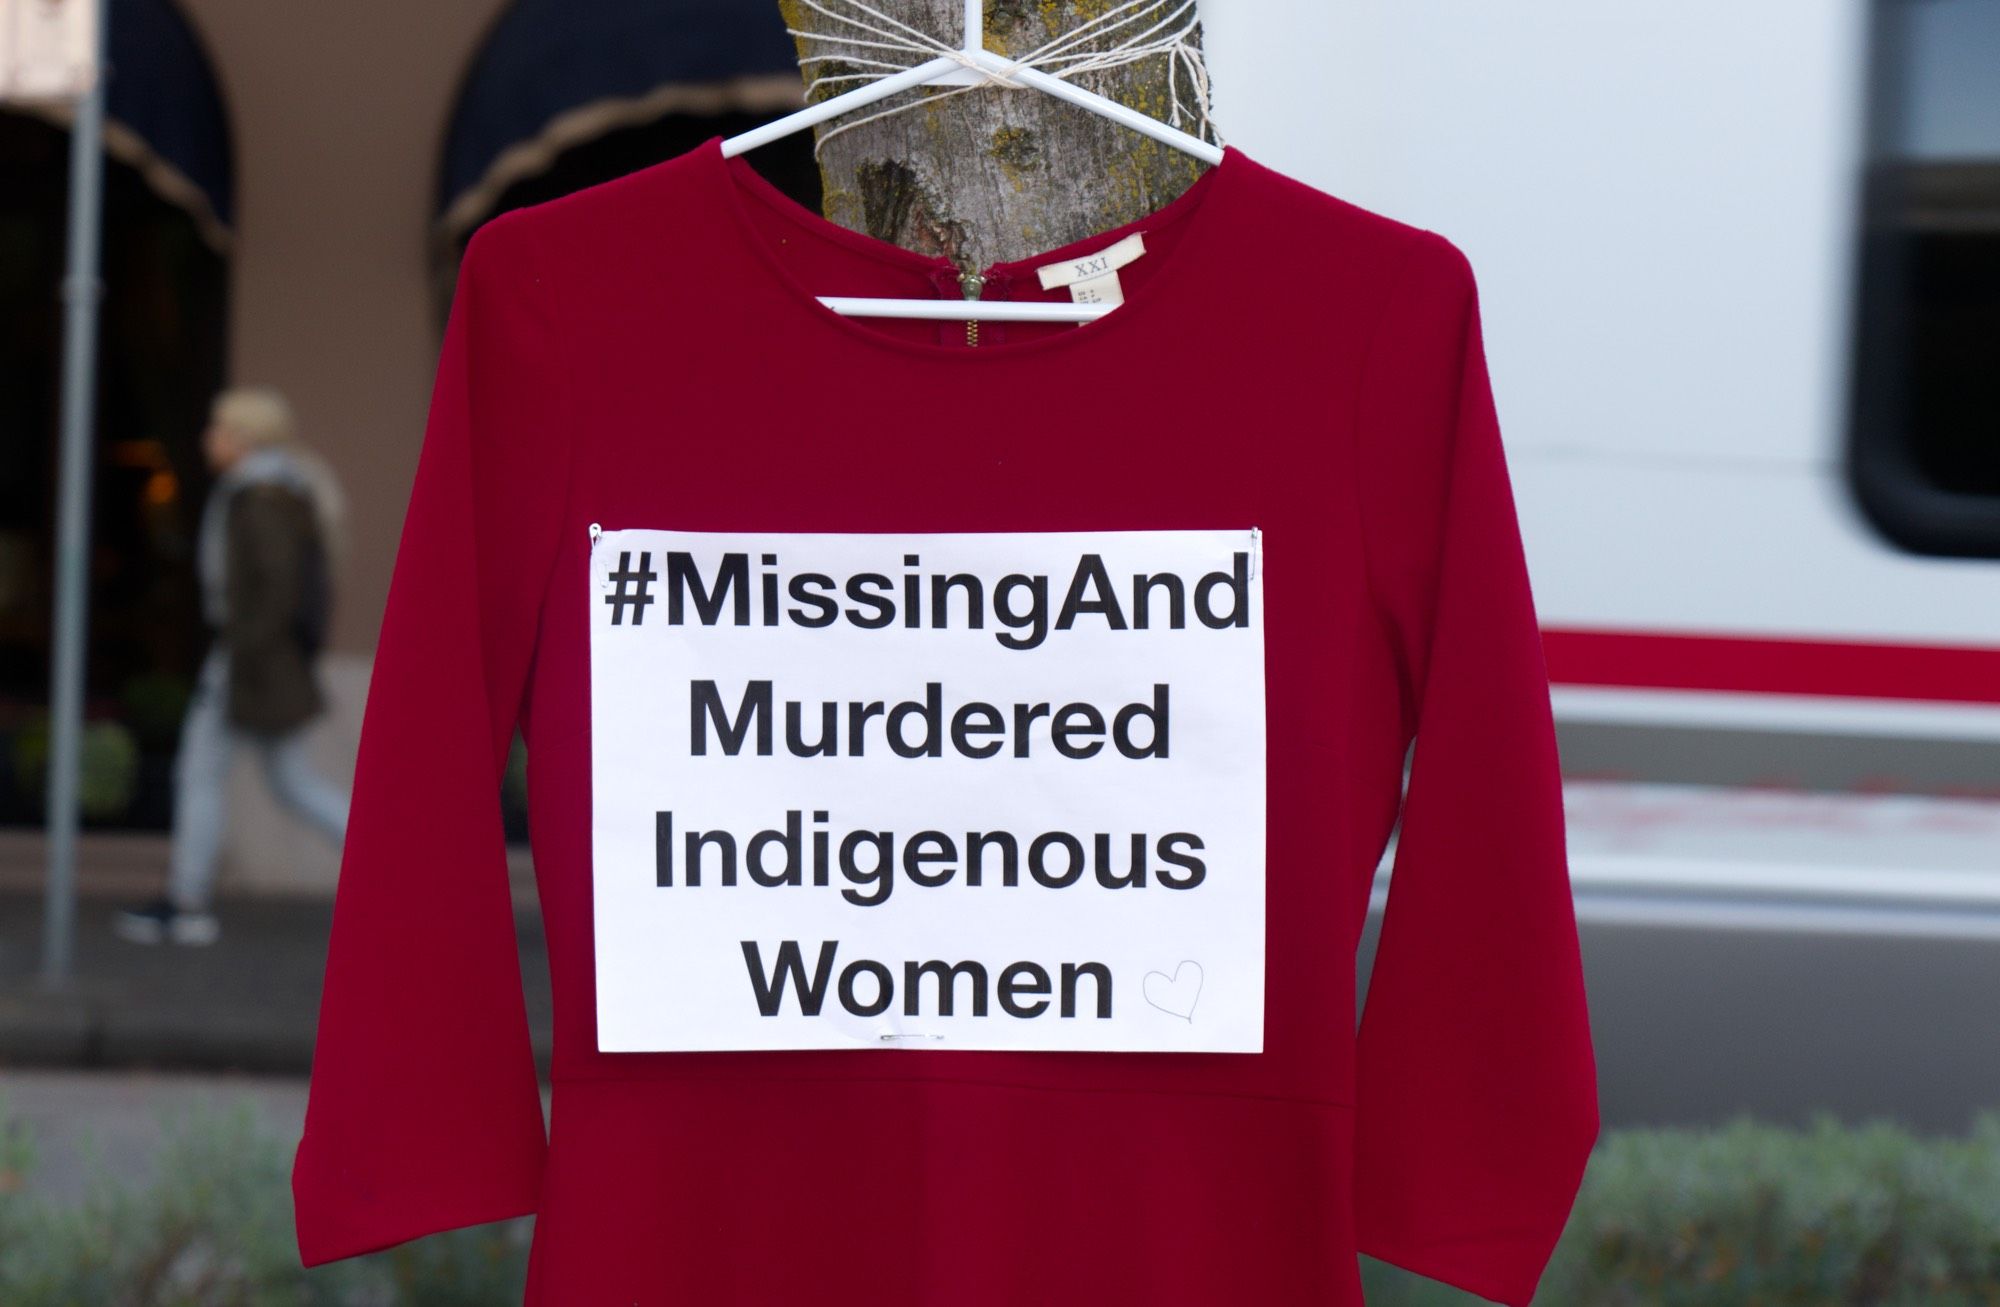 Missing and murdered indigenous women # on dress